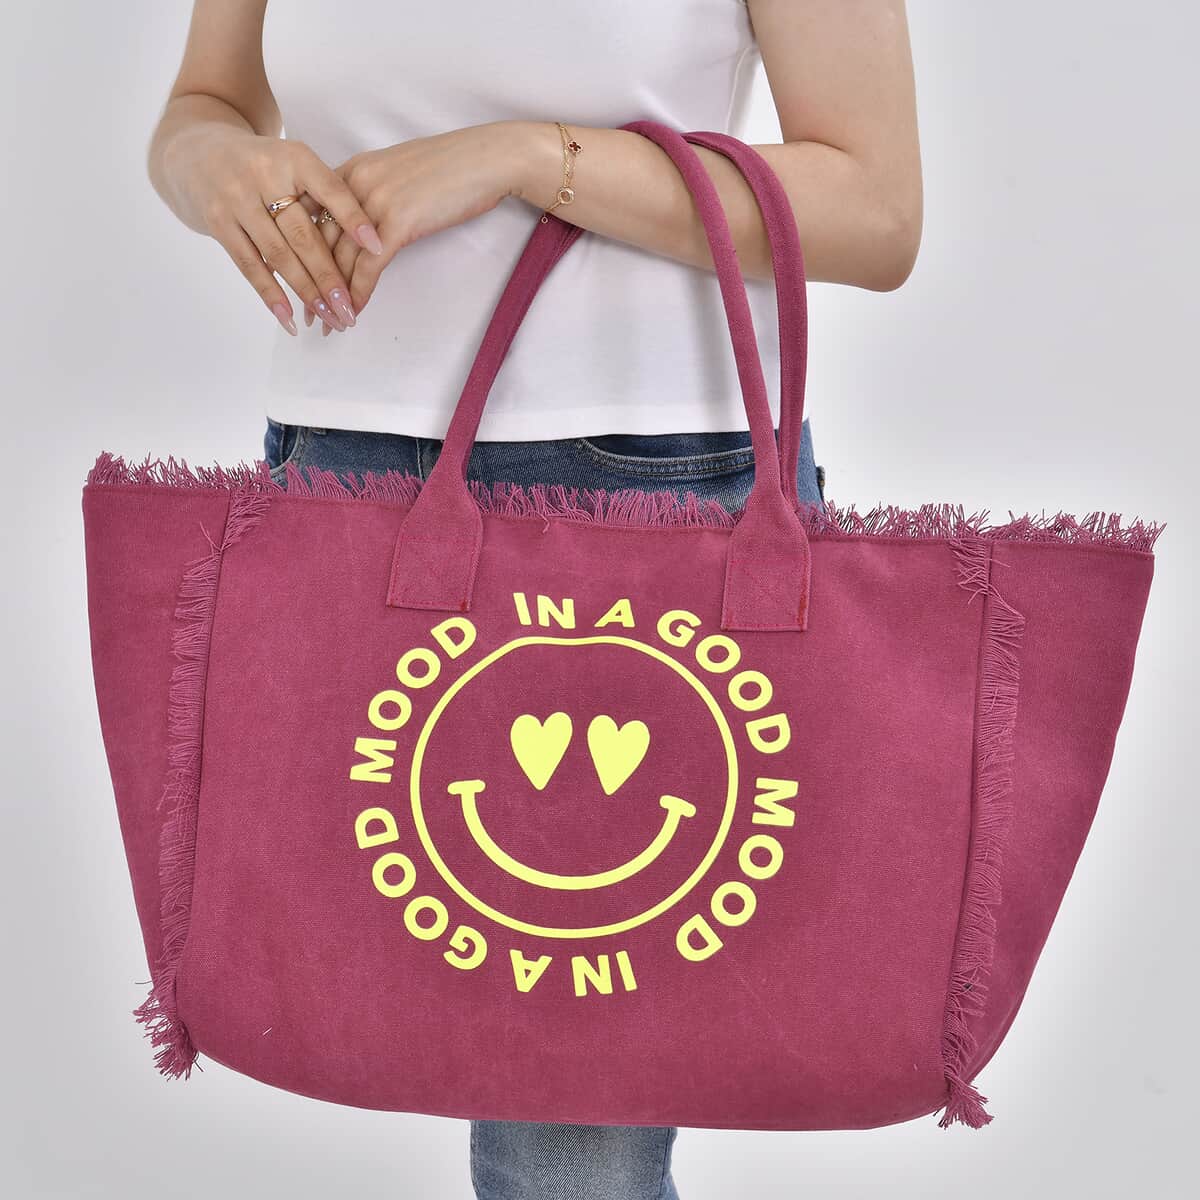 Navy Collection Wine Red Color Smiling Face with Heart-Eyes Printed Tote Bag (17.7"x7.9"x13.4") image number 2